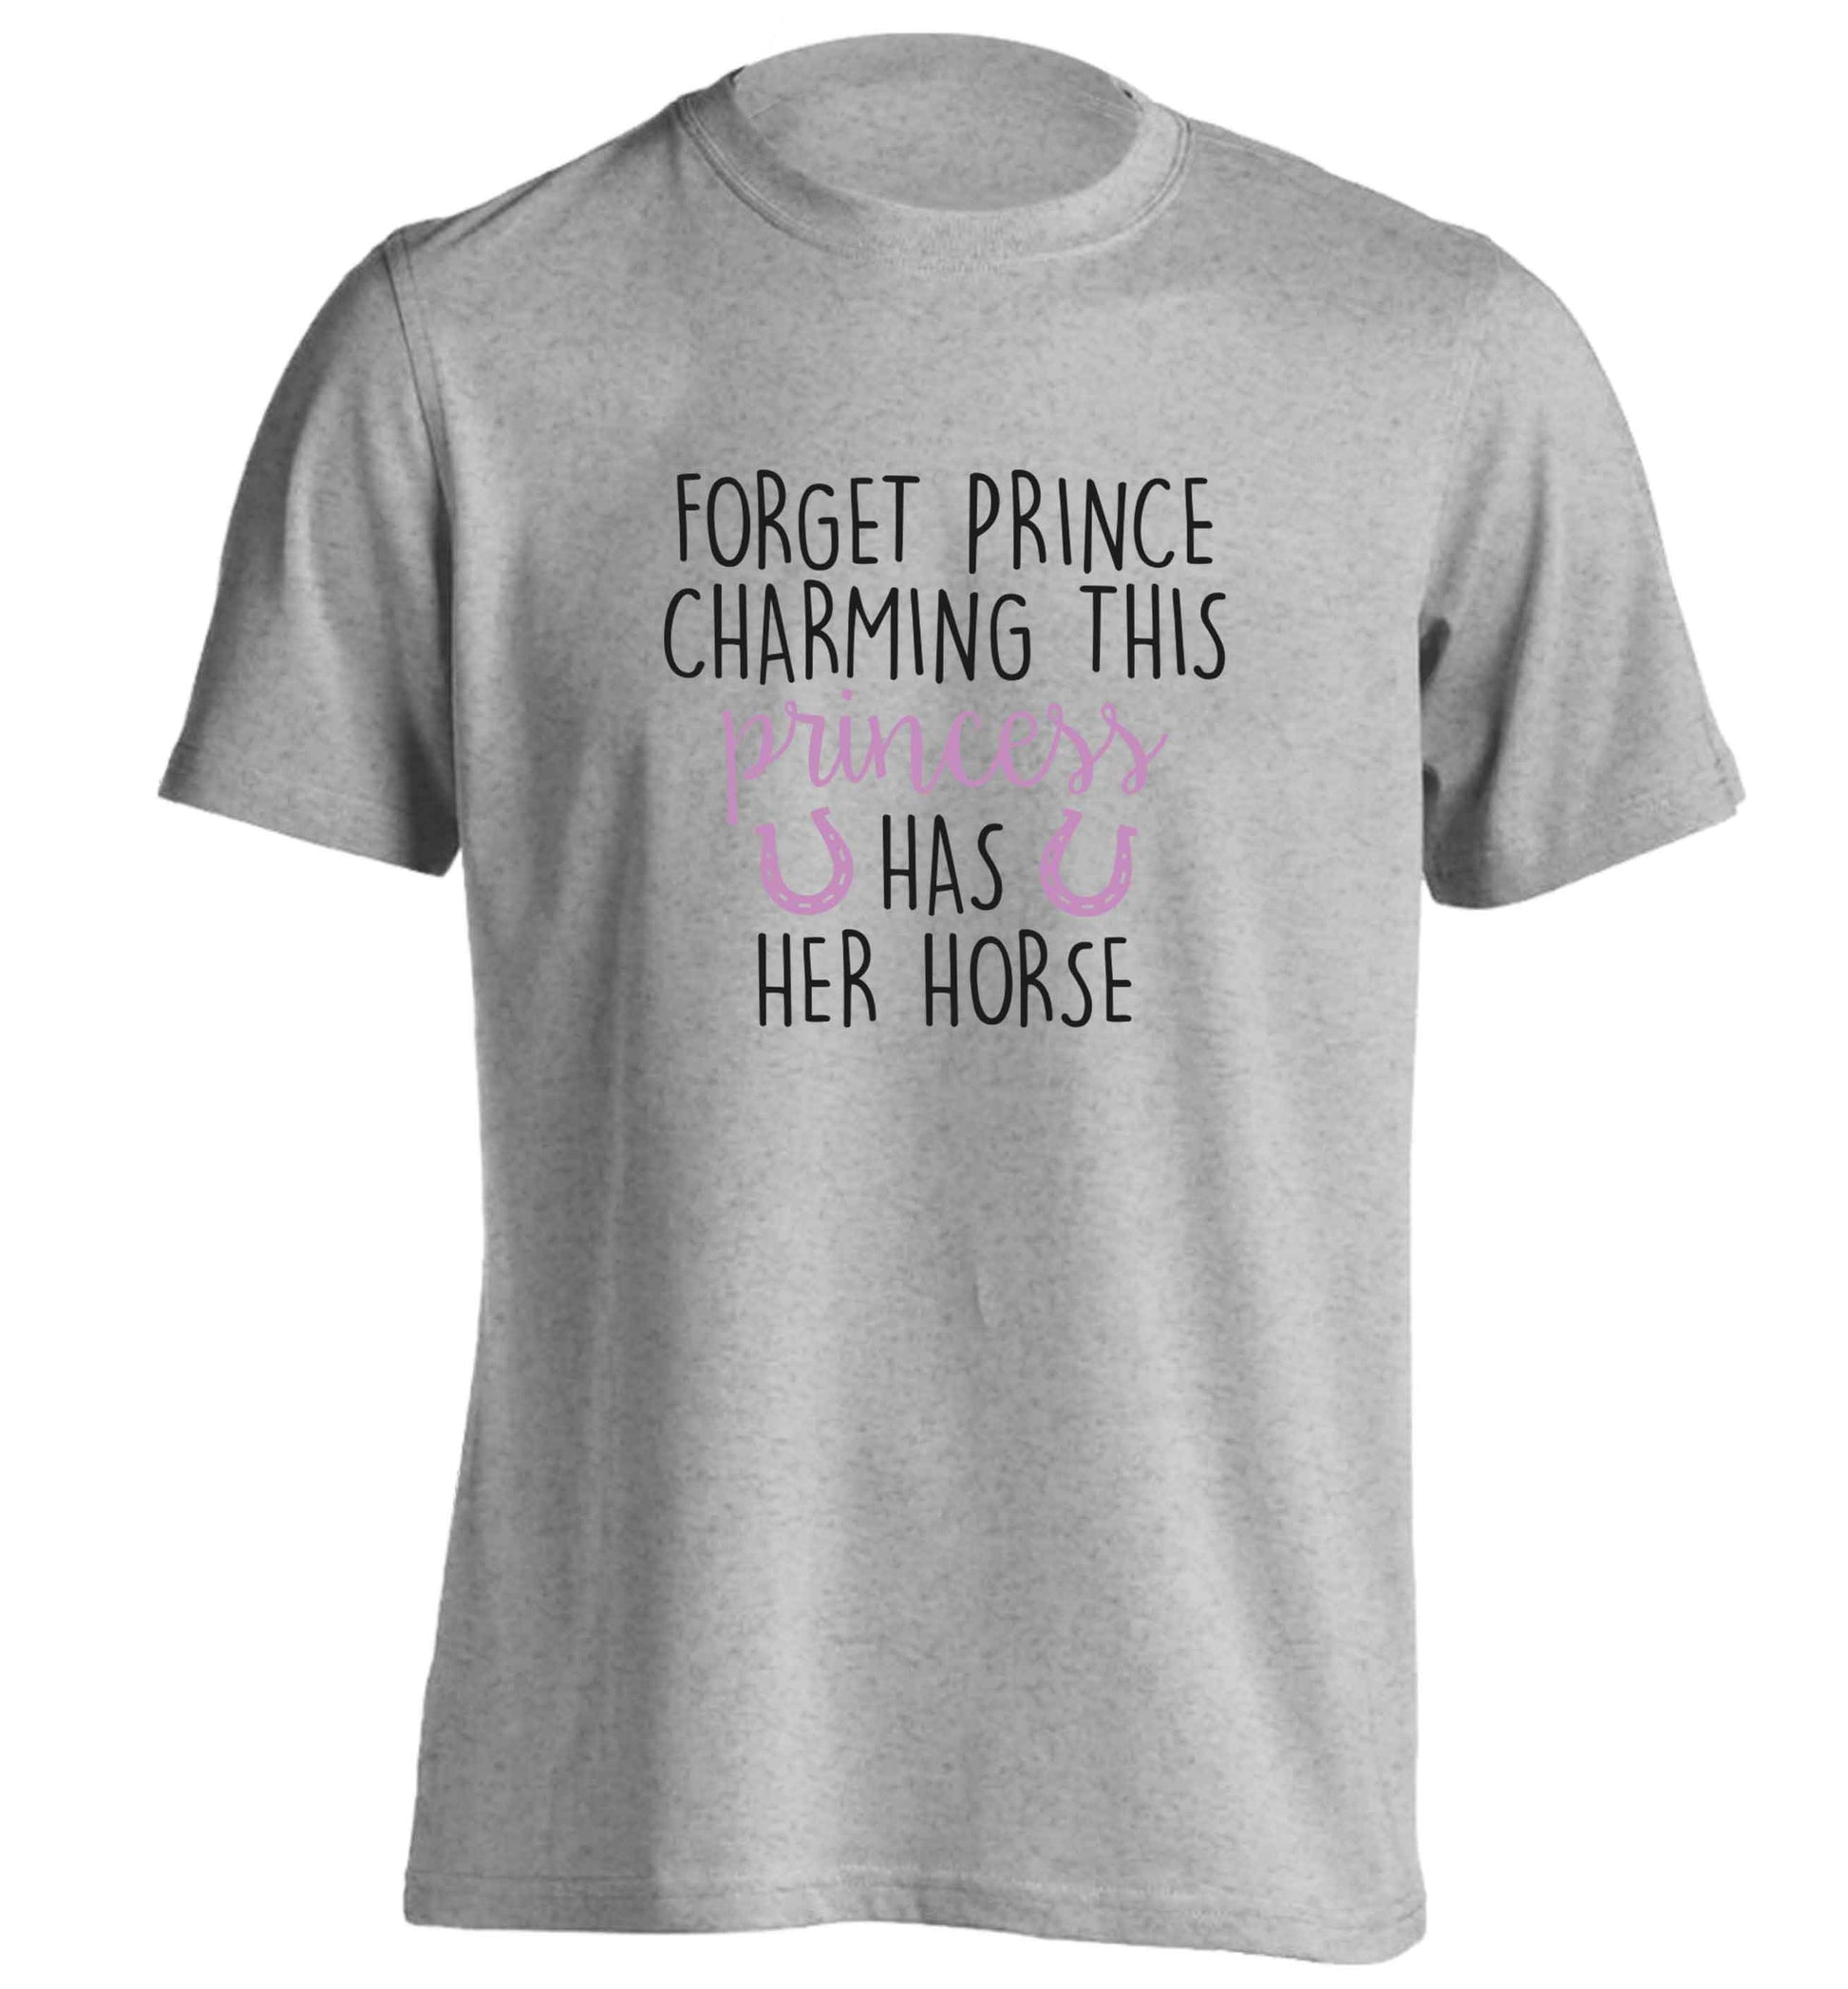 Forget prince charming this princess has her horse adults unisex grey Tshirt 2XL